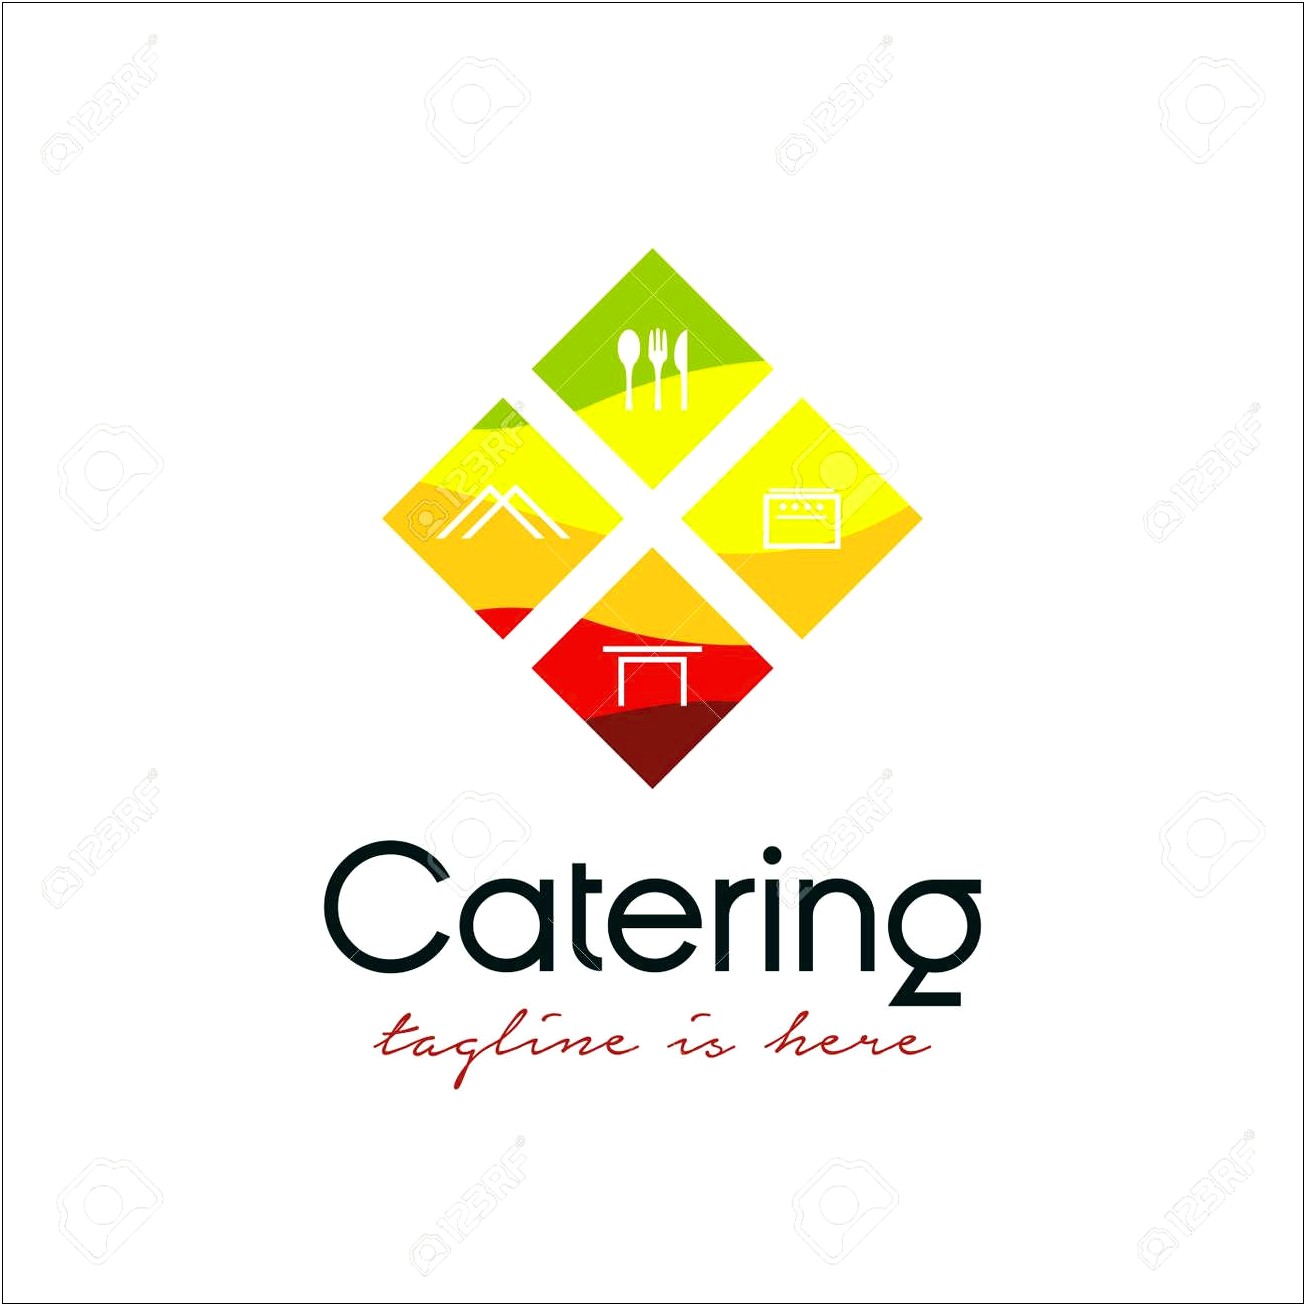 Catering Logo Design Templates Free Download